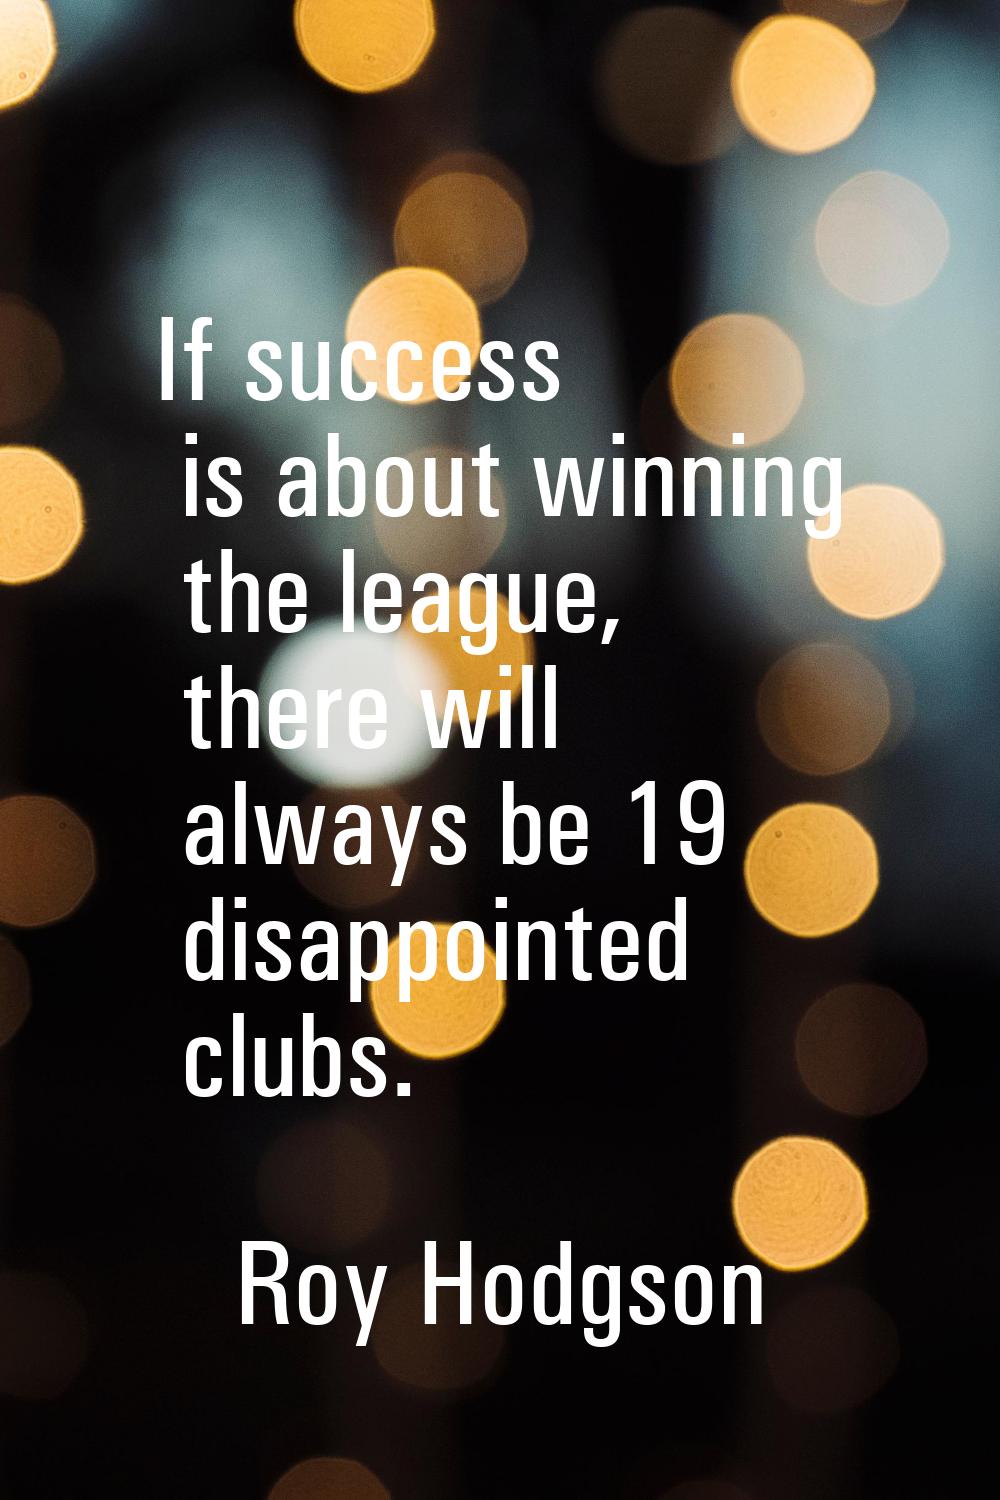 If success is about winning the league, there will always be 19 disappointed clubs.